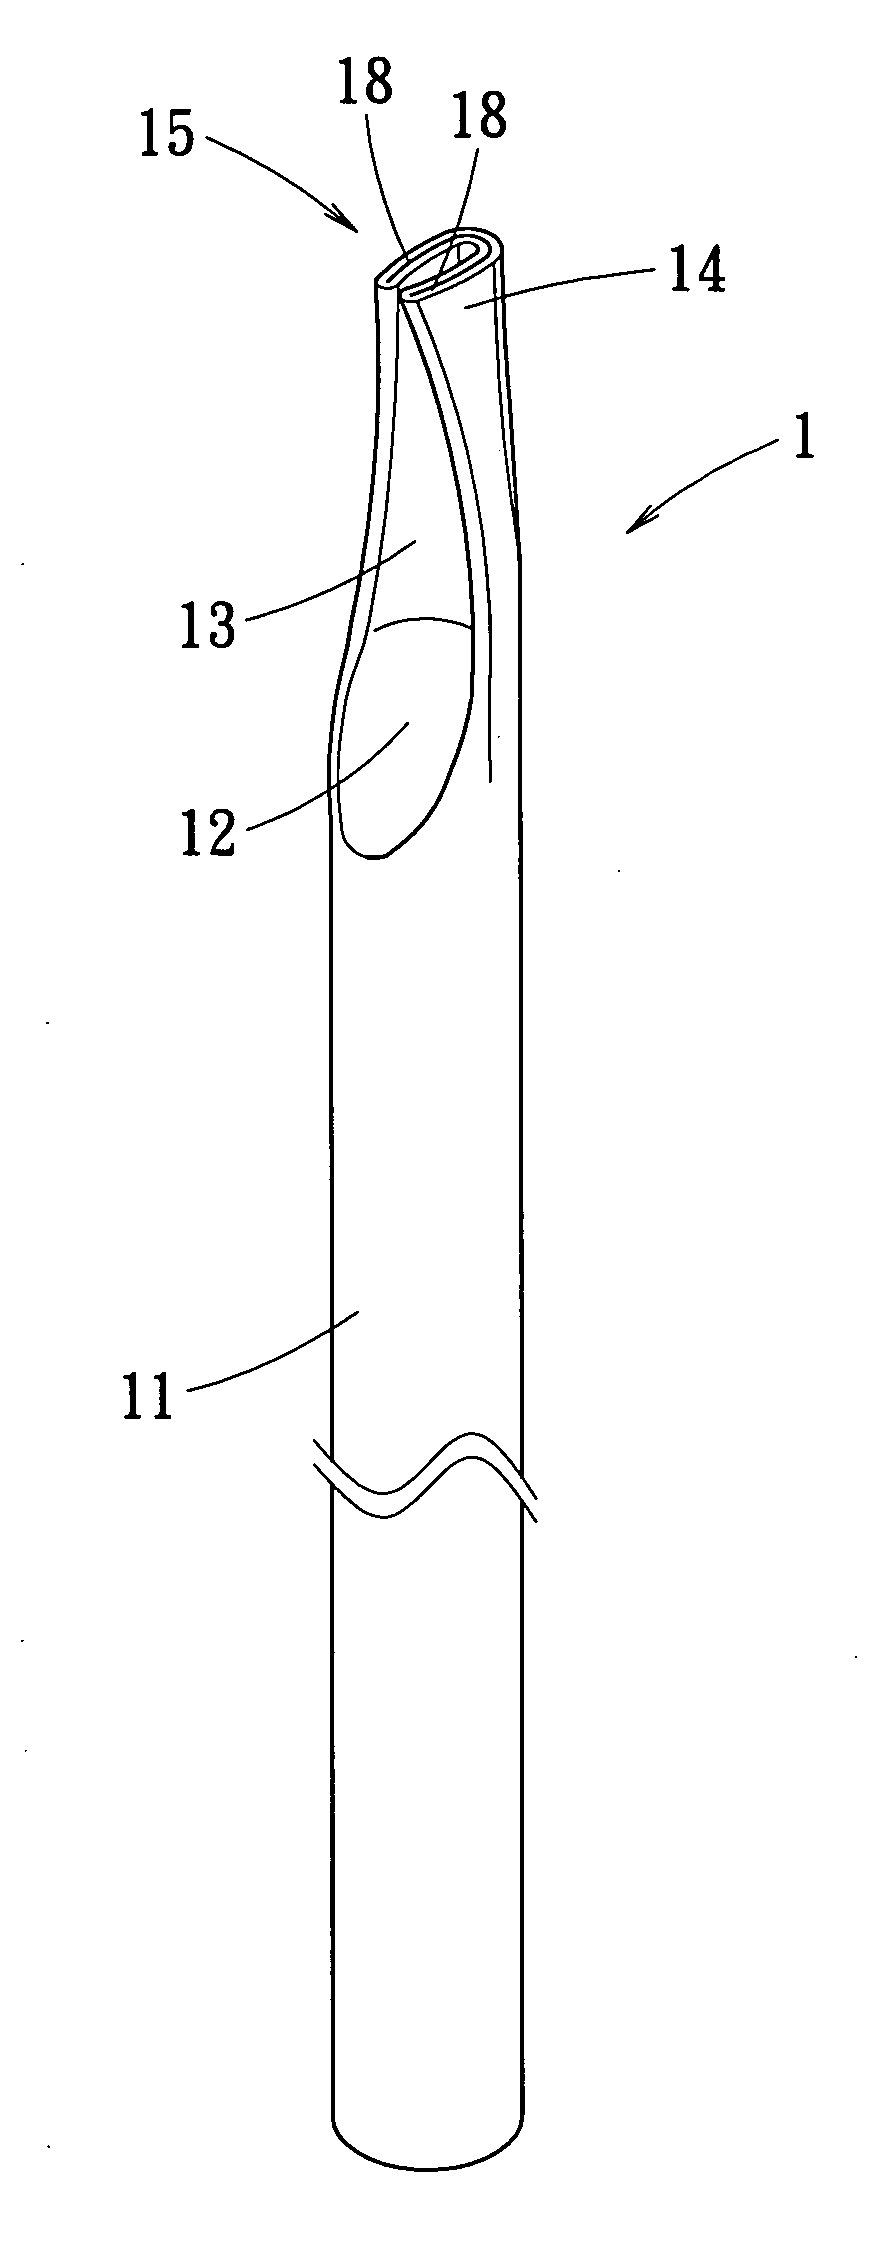 Circular tubular heat pipe having a sealed structure closing a distal opening thereof